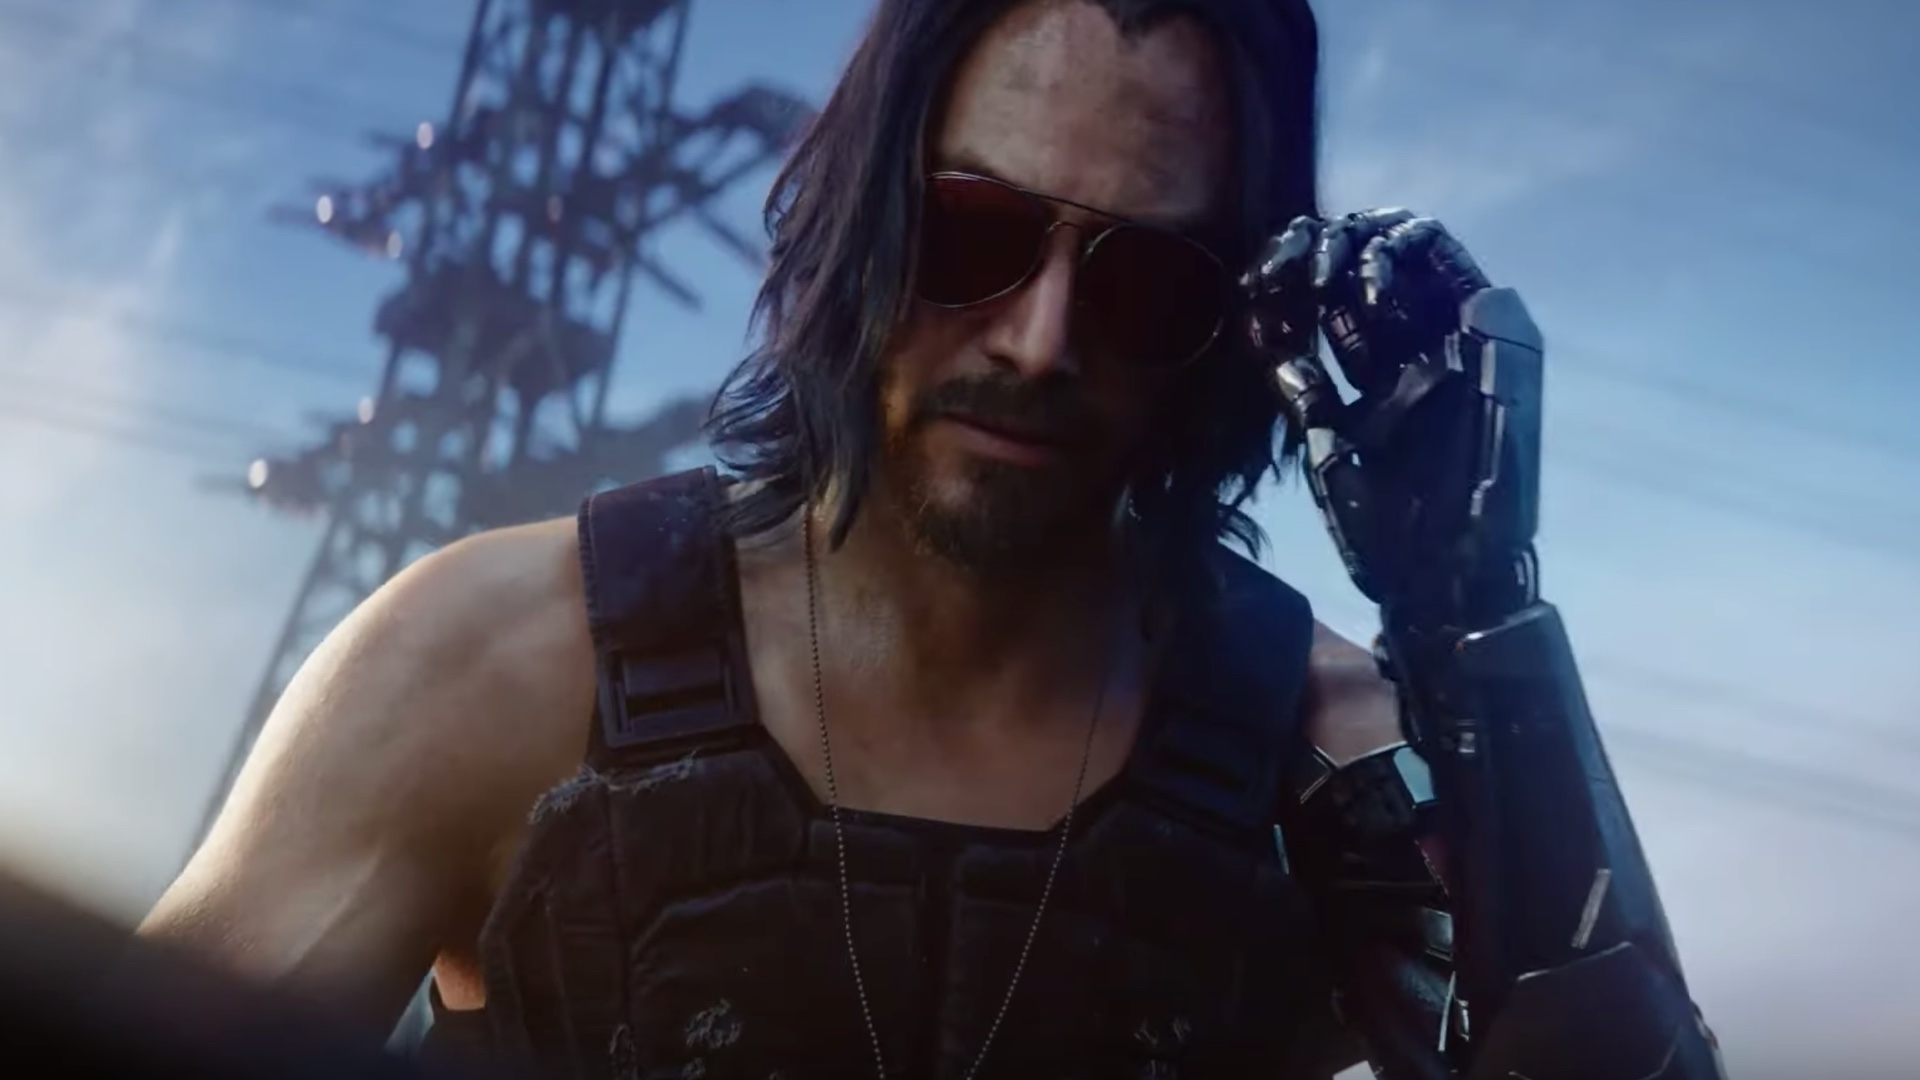 Keanu Reeves as one of the main characters in upcoming Cyberpunk 2077